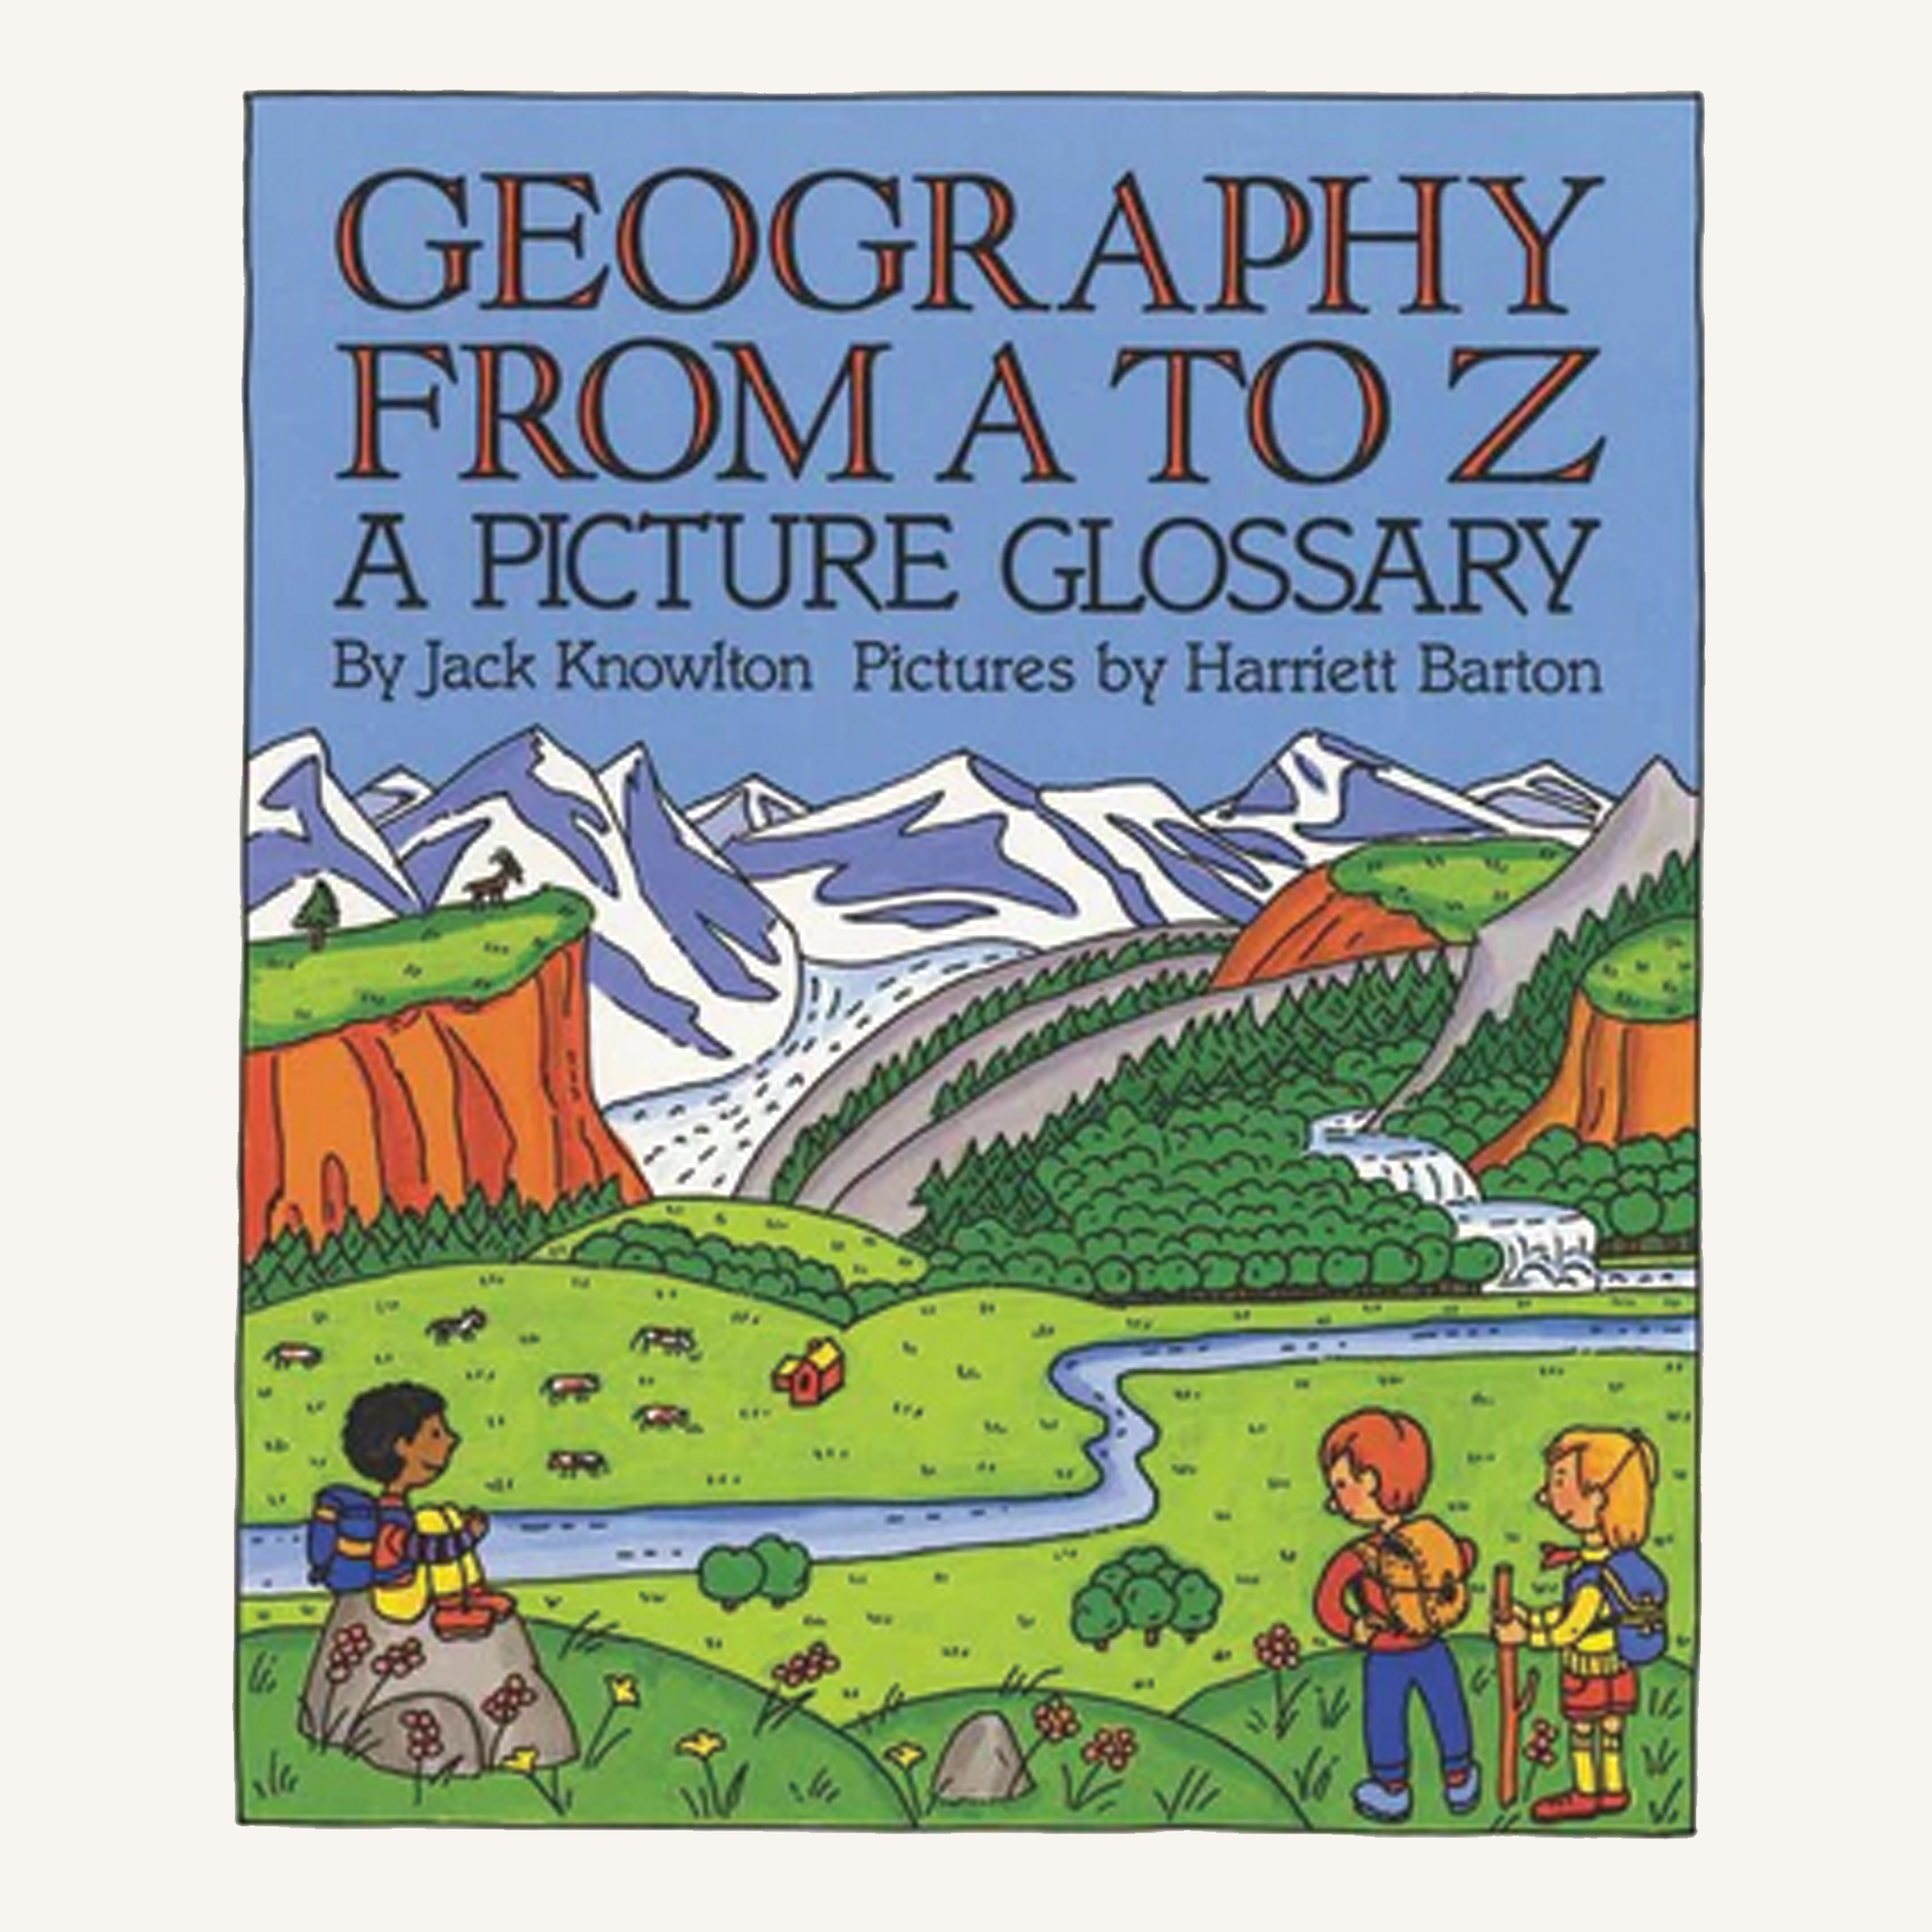 Geography From A to Z: A Picture Glossary